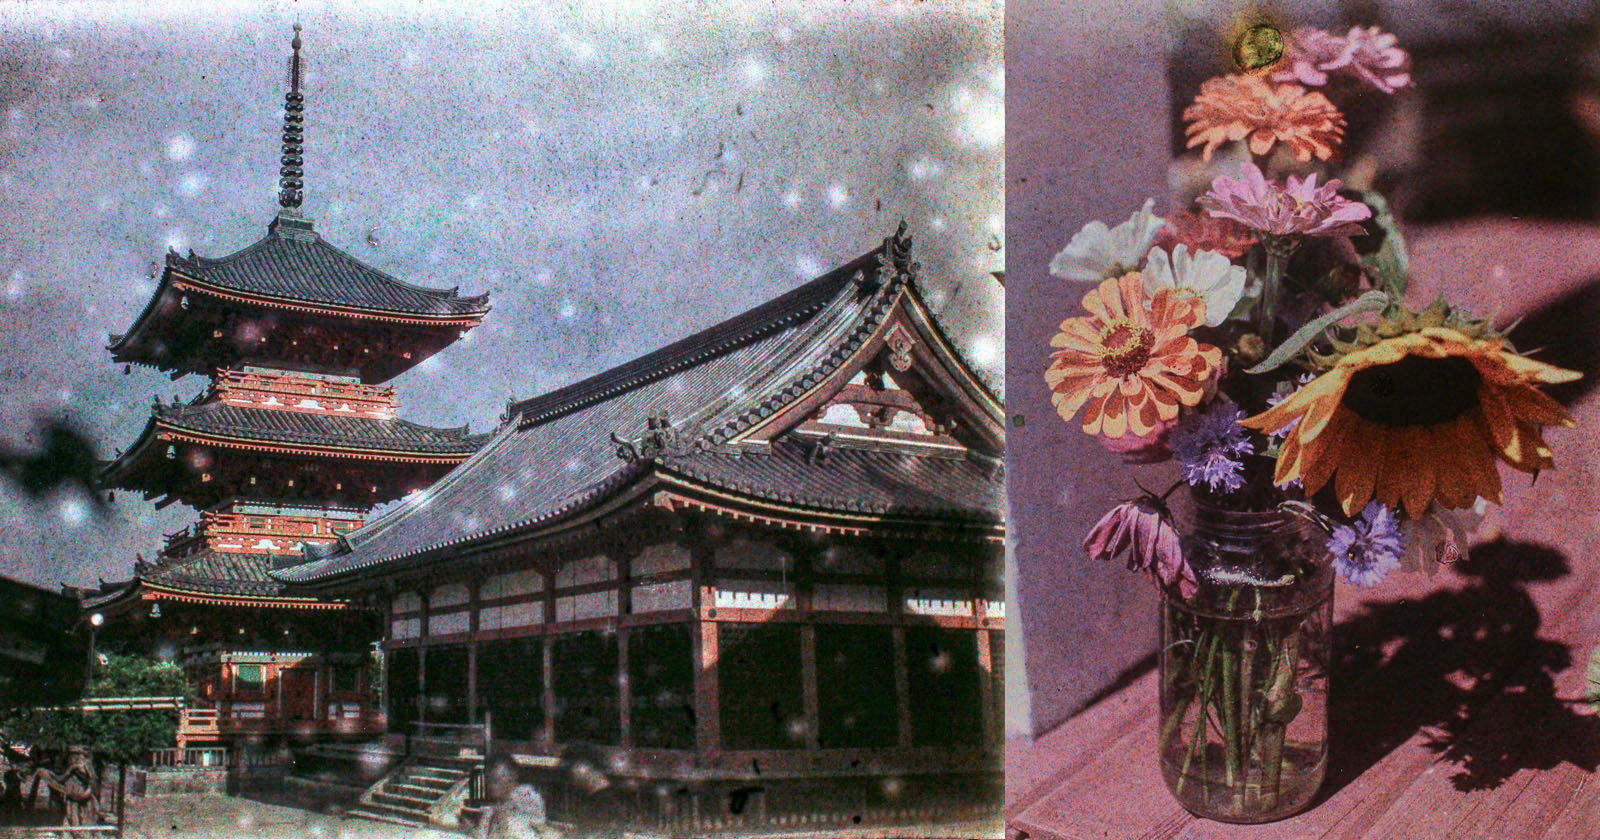 A split image featuring a traditional japanese pagoda with intricate wooden architecture on the left and a colorful bouquet of flowers in a glass jar casting shadows on a table on the right.